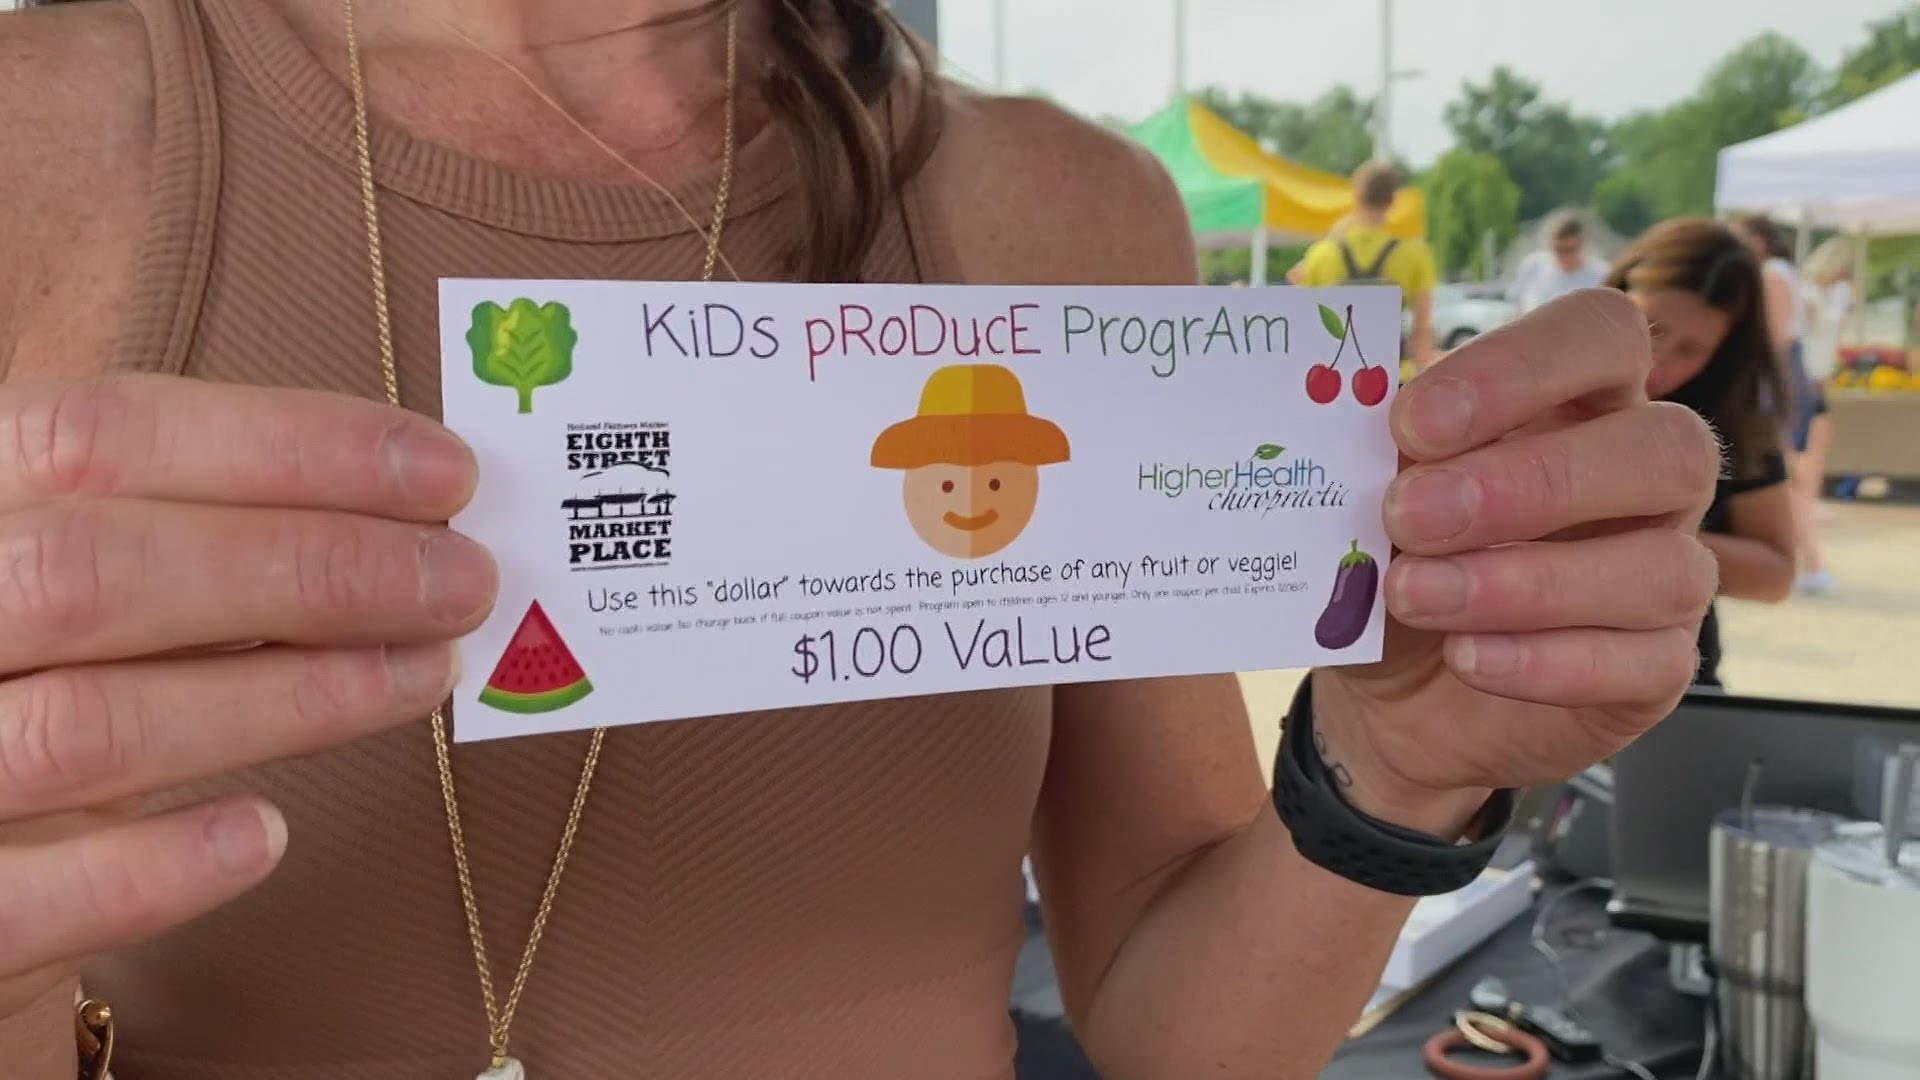 At the Farmer's Market on Wednesday's children ages 12 and under can go up to the Higher Health booth and get a voucher worth $1.